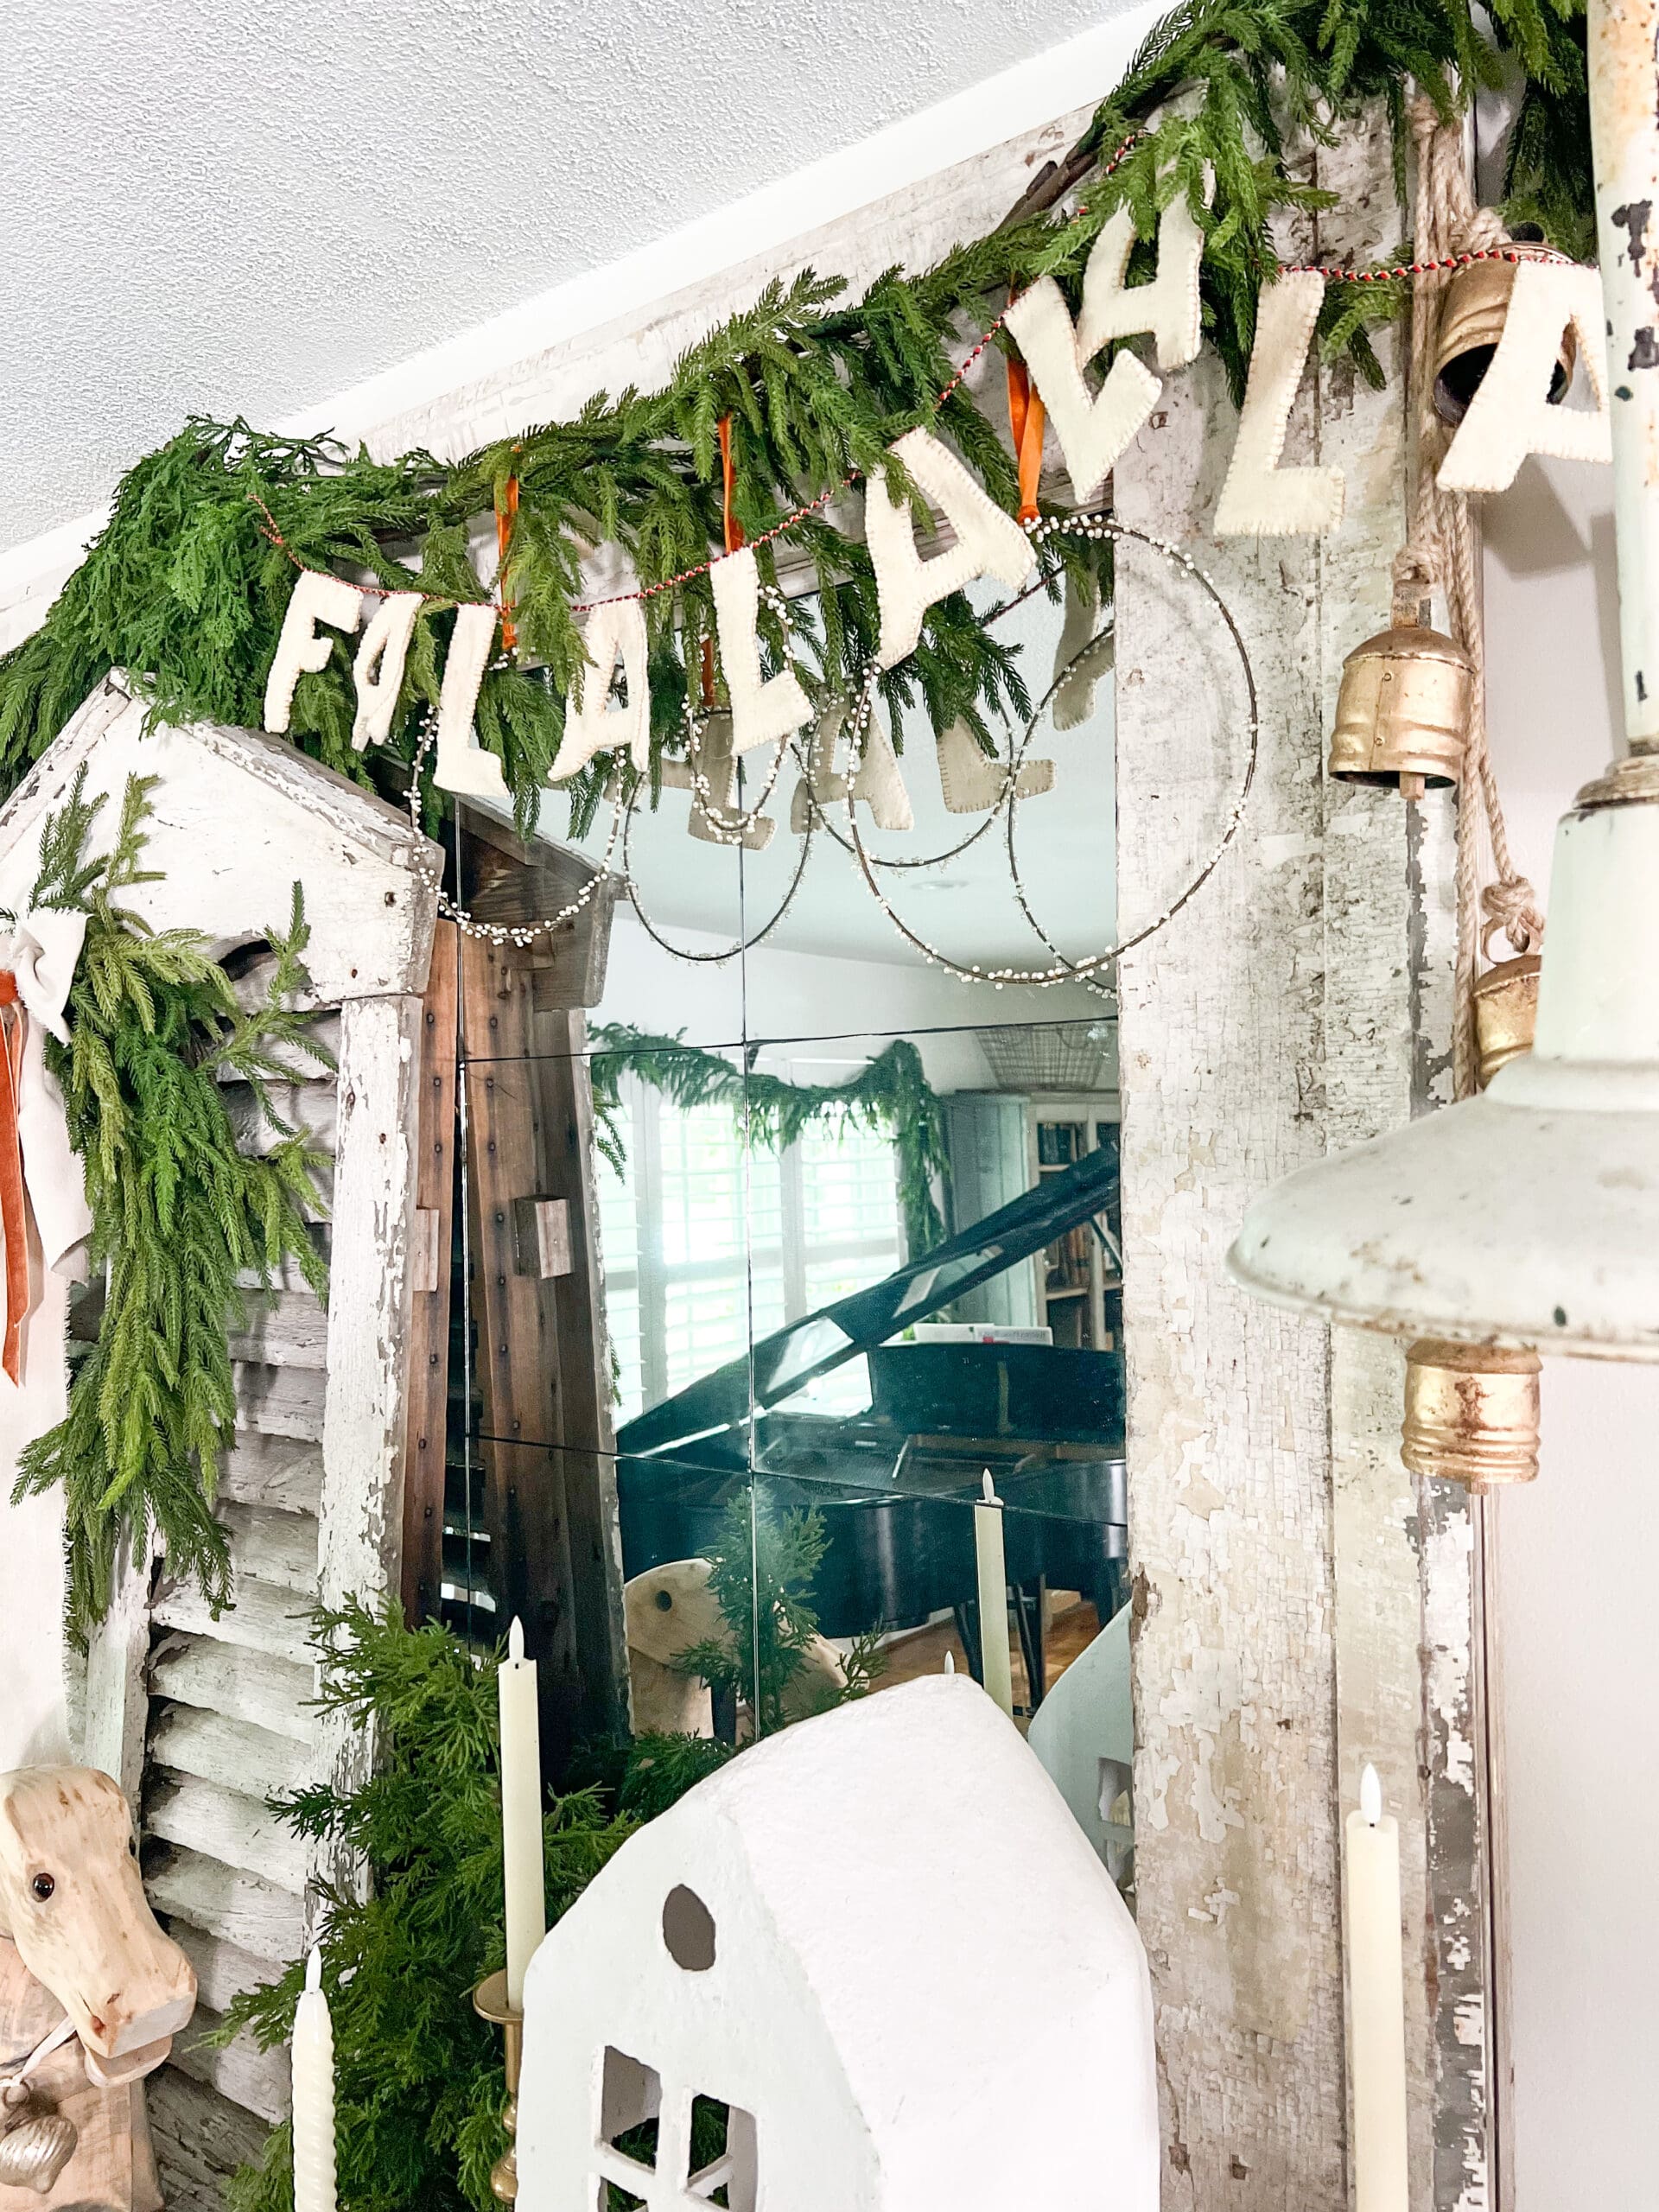 "Fa la la" garland hung on a large mirror with Christmas greenery framing the mirror and golden bells hanging from the edges